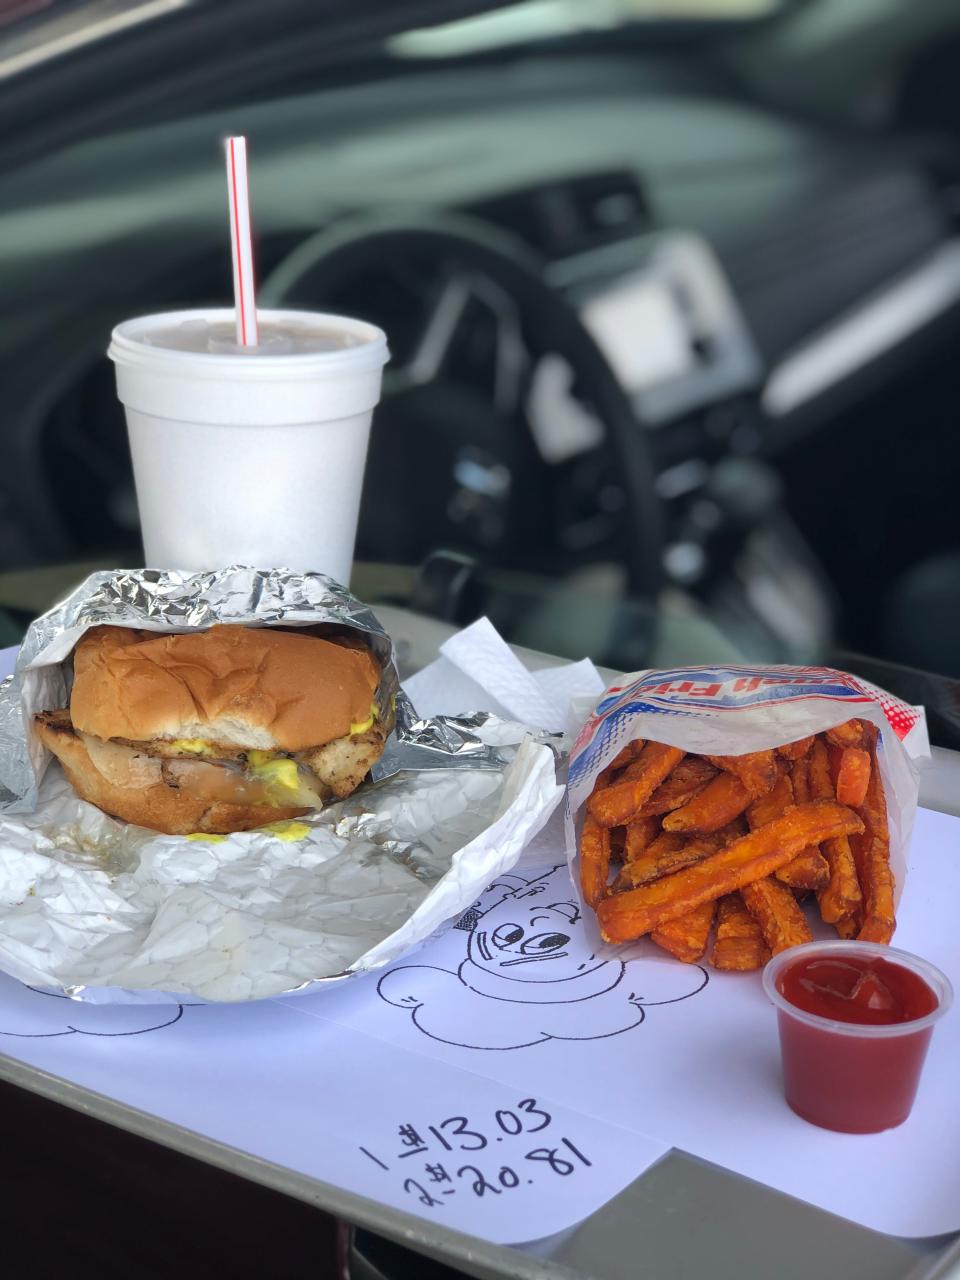 A grilled honey mustard chicken sandwich, sweet potato fries and Boston Cooler are on the menu at Dilly's Drive-in.